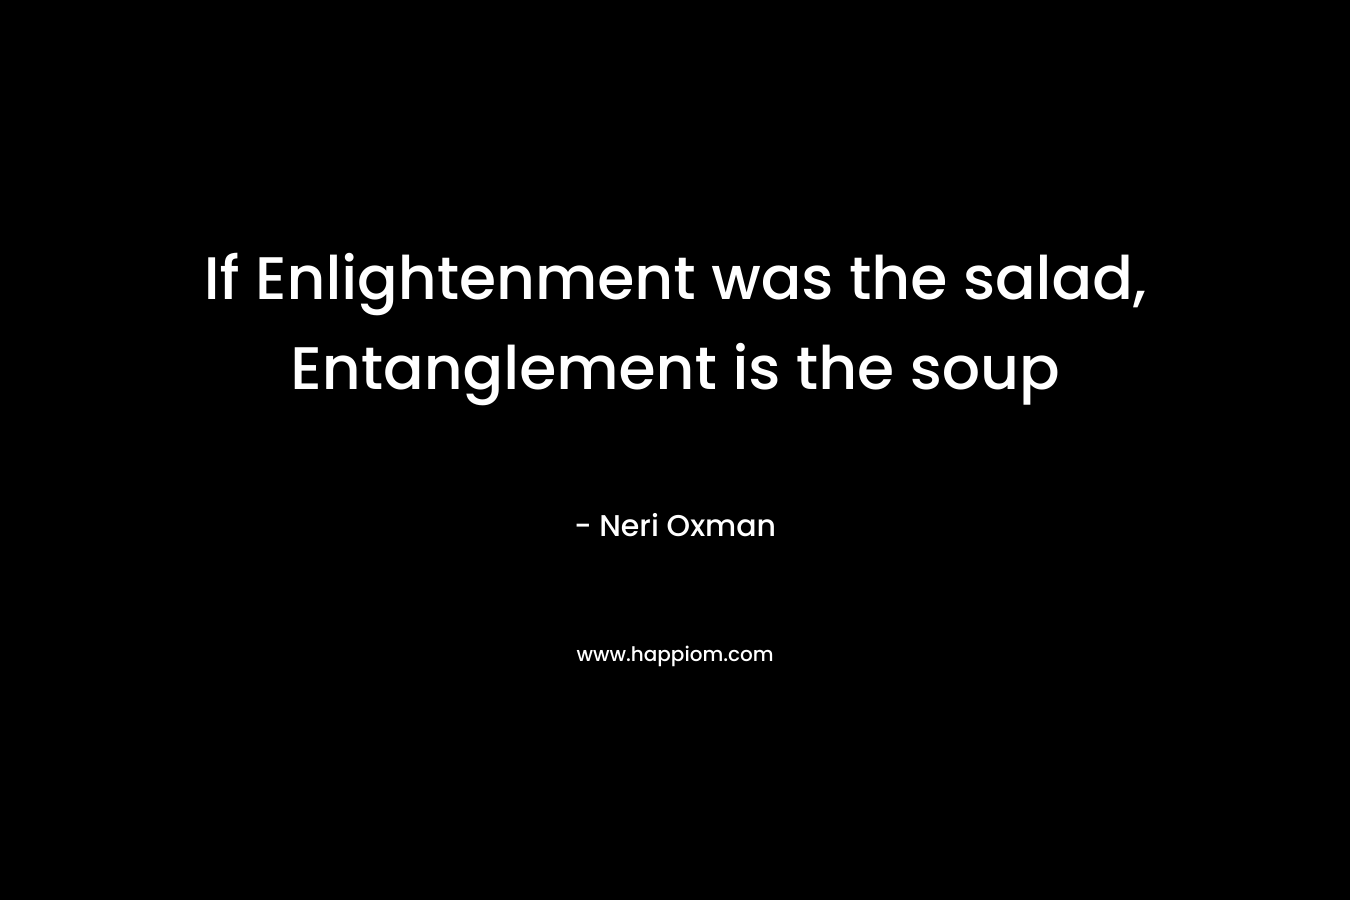 If Enlightenment was the salad, Entanglement is the soup